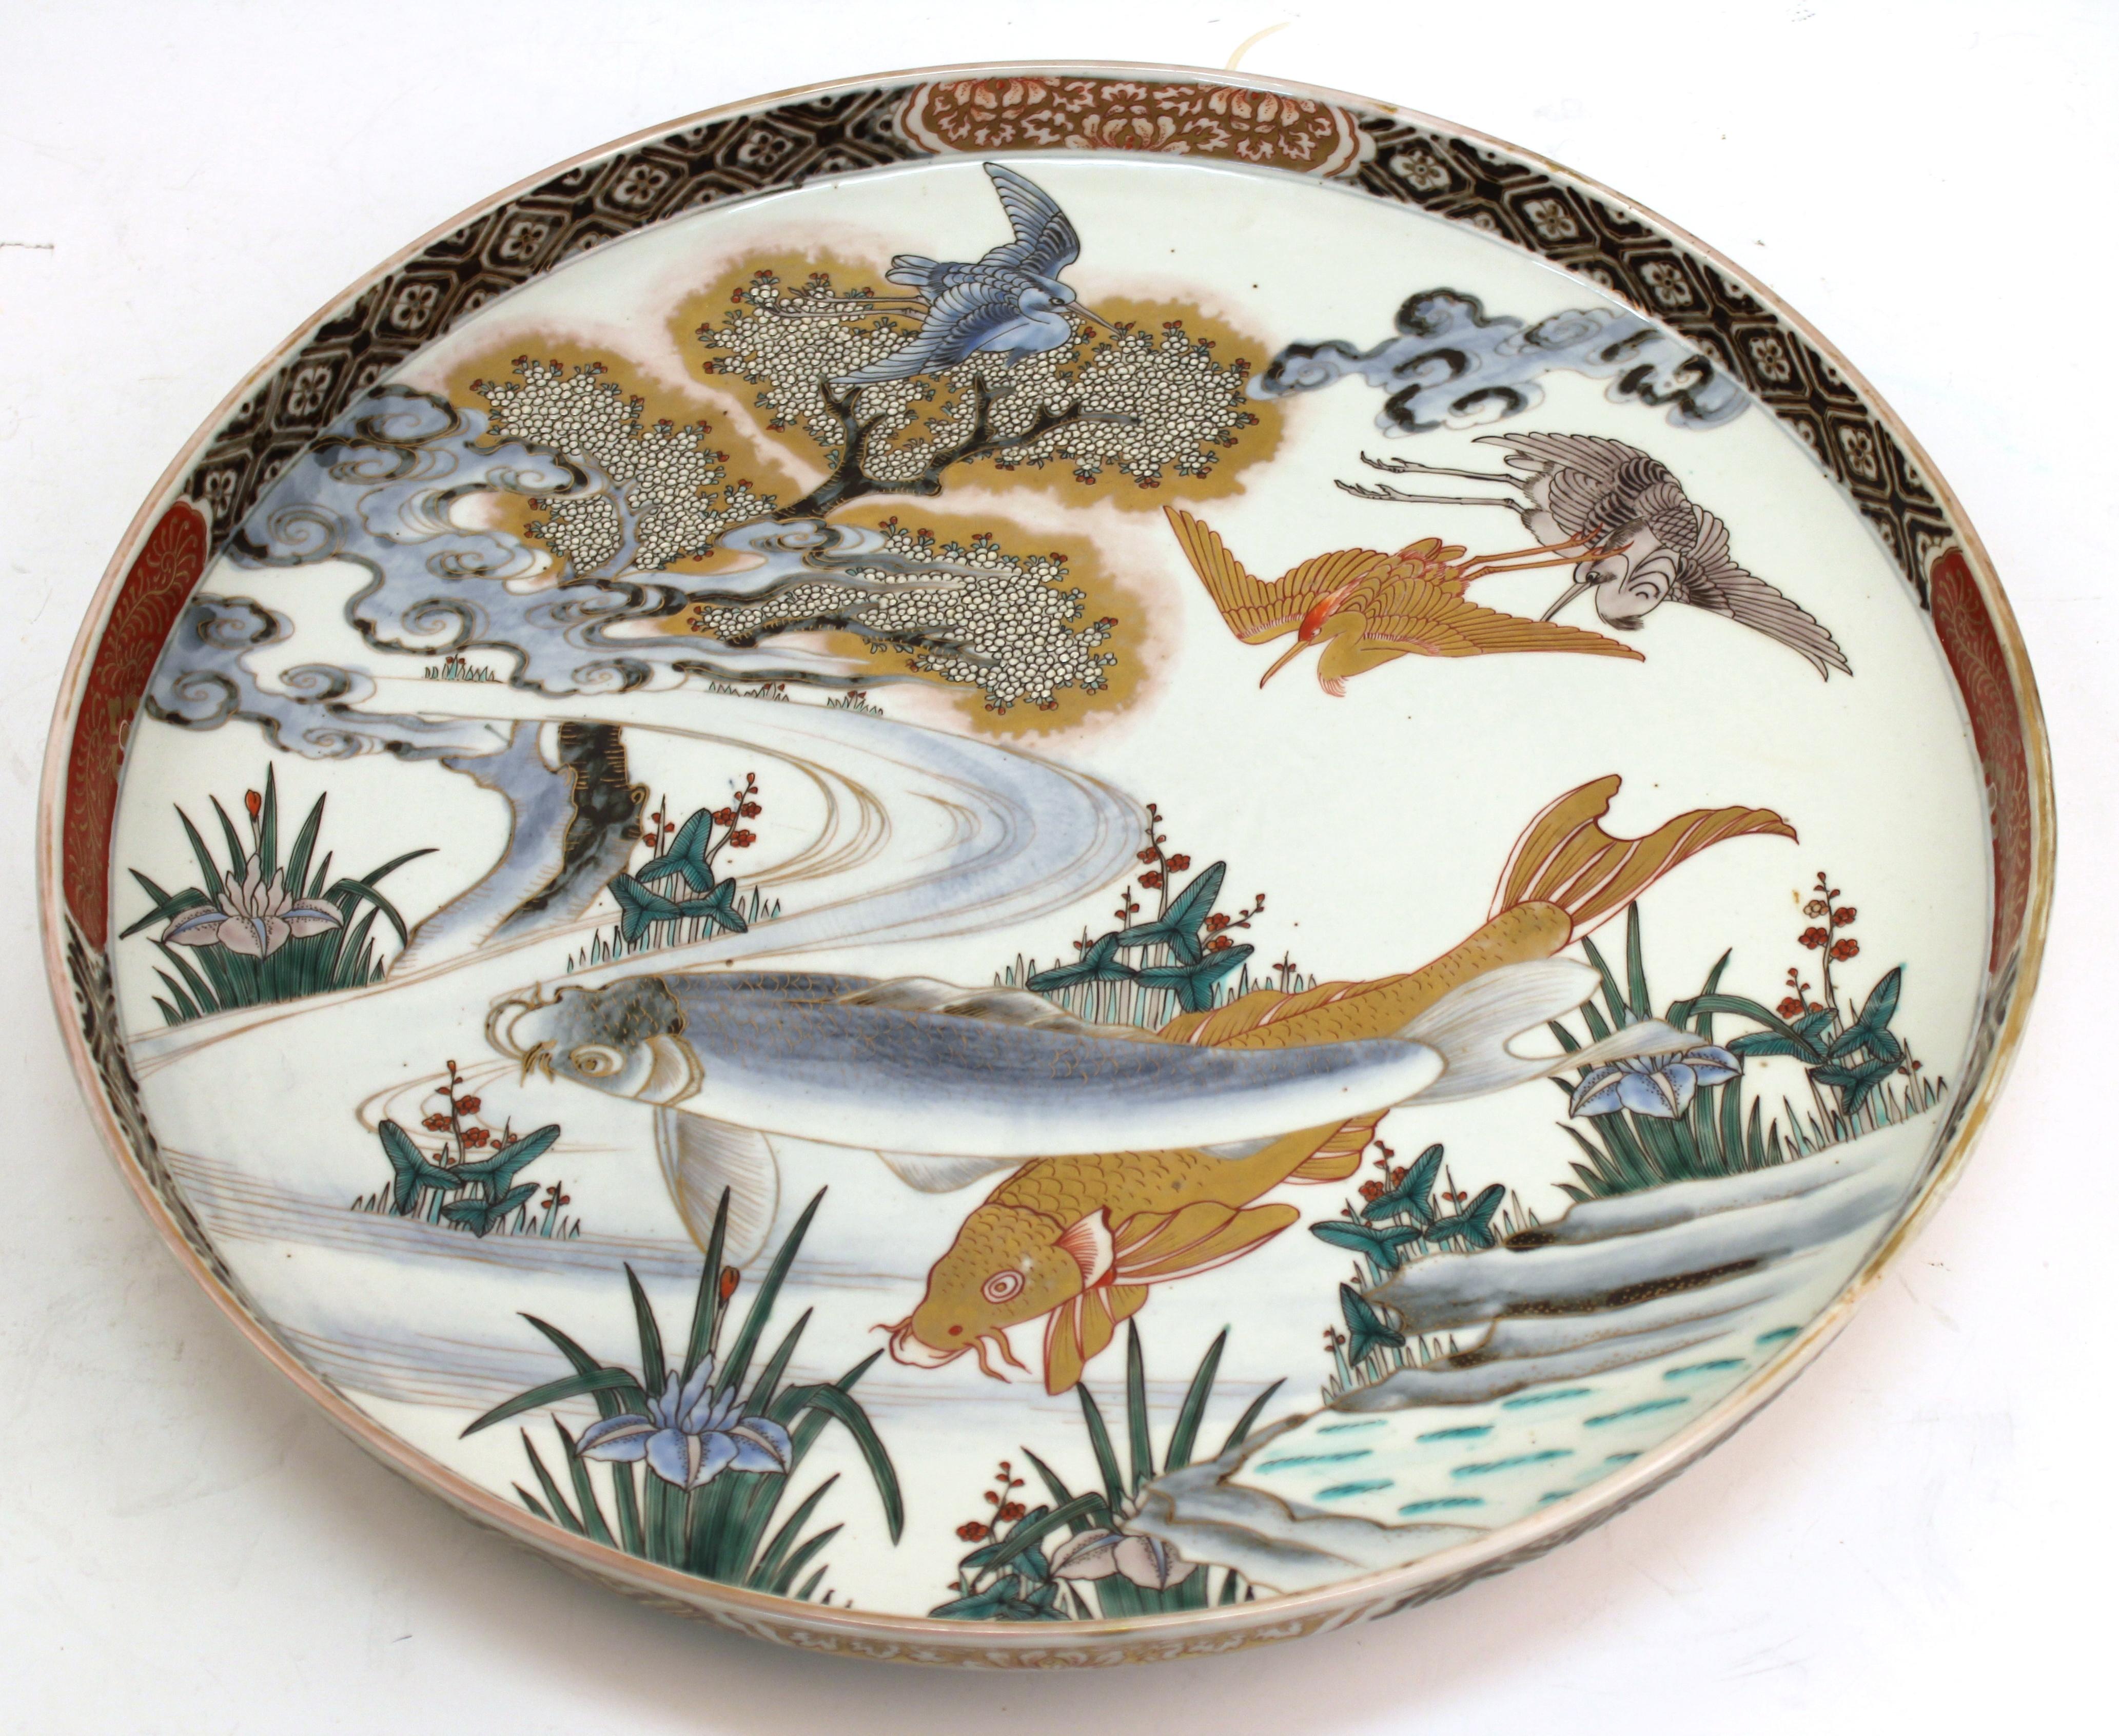 Japanese Meiji Porcelain Charger with Fish Theme For Sale 4